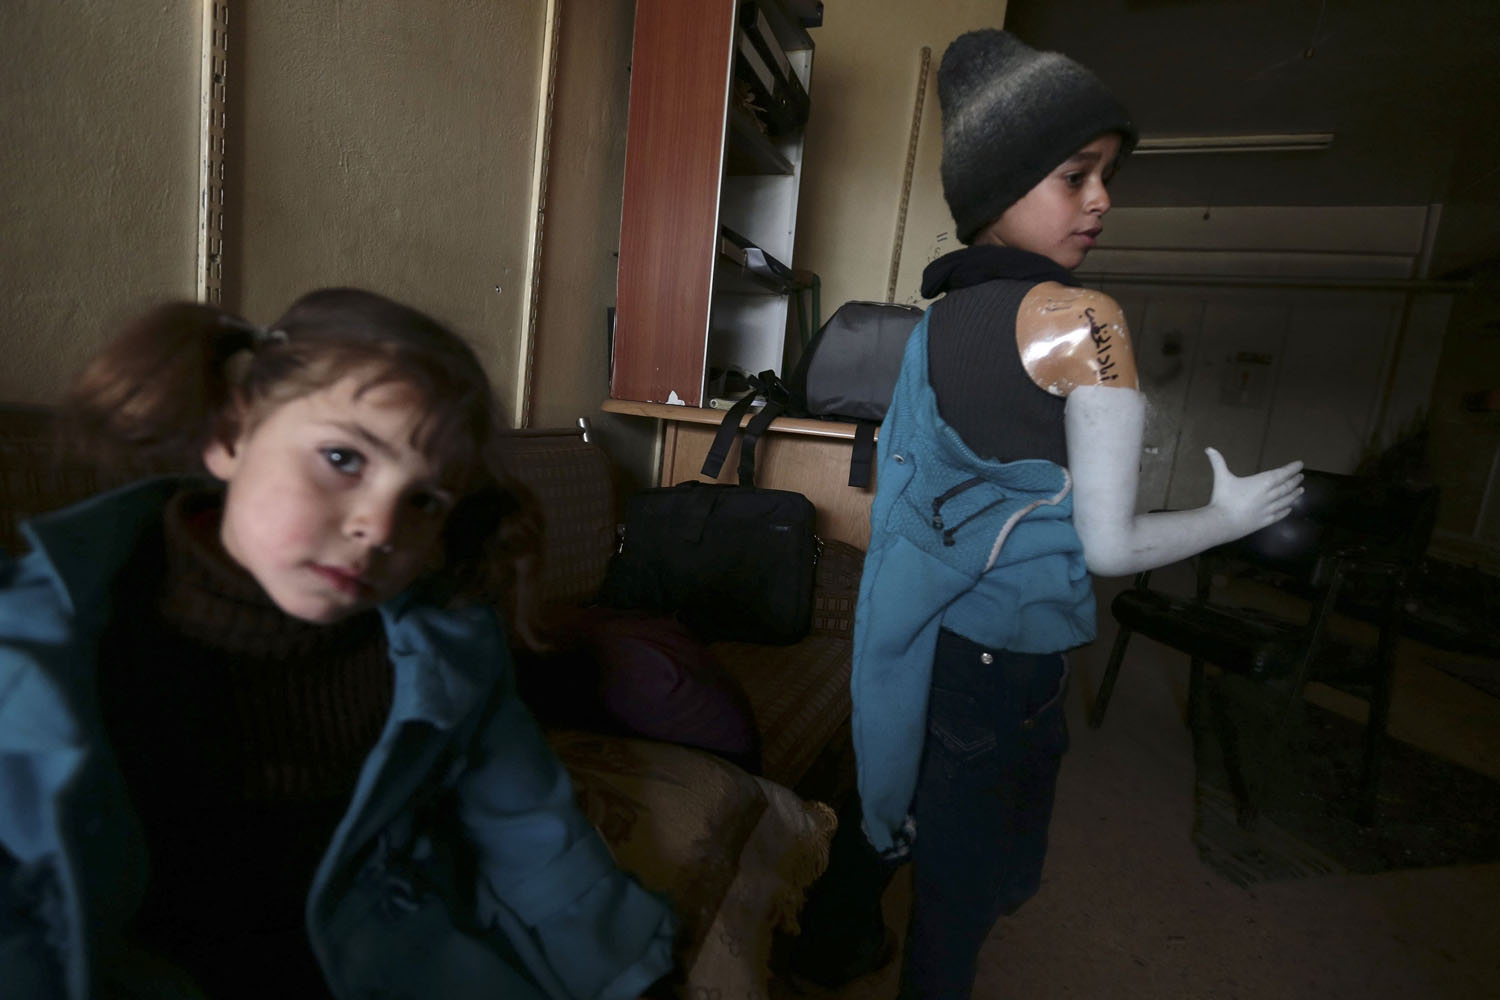 Eyad, a 12 year-old boy who lost his arm during shelling by forces loyal to Syria's President Assad, tries on a prosthetic arm in Damascus